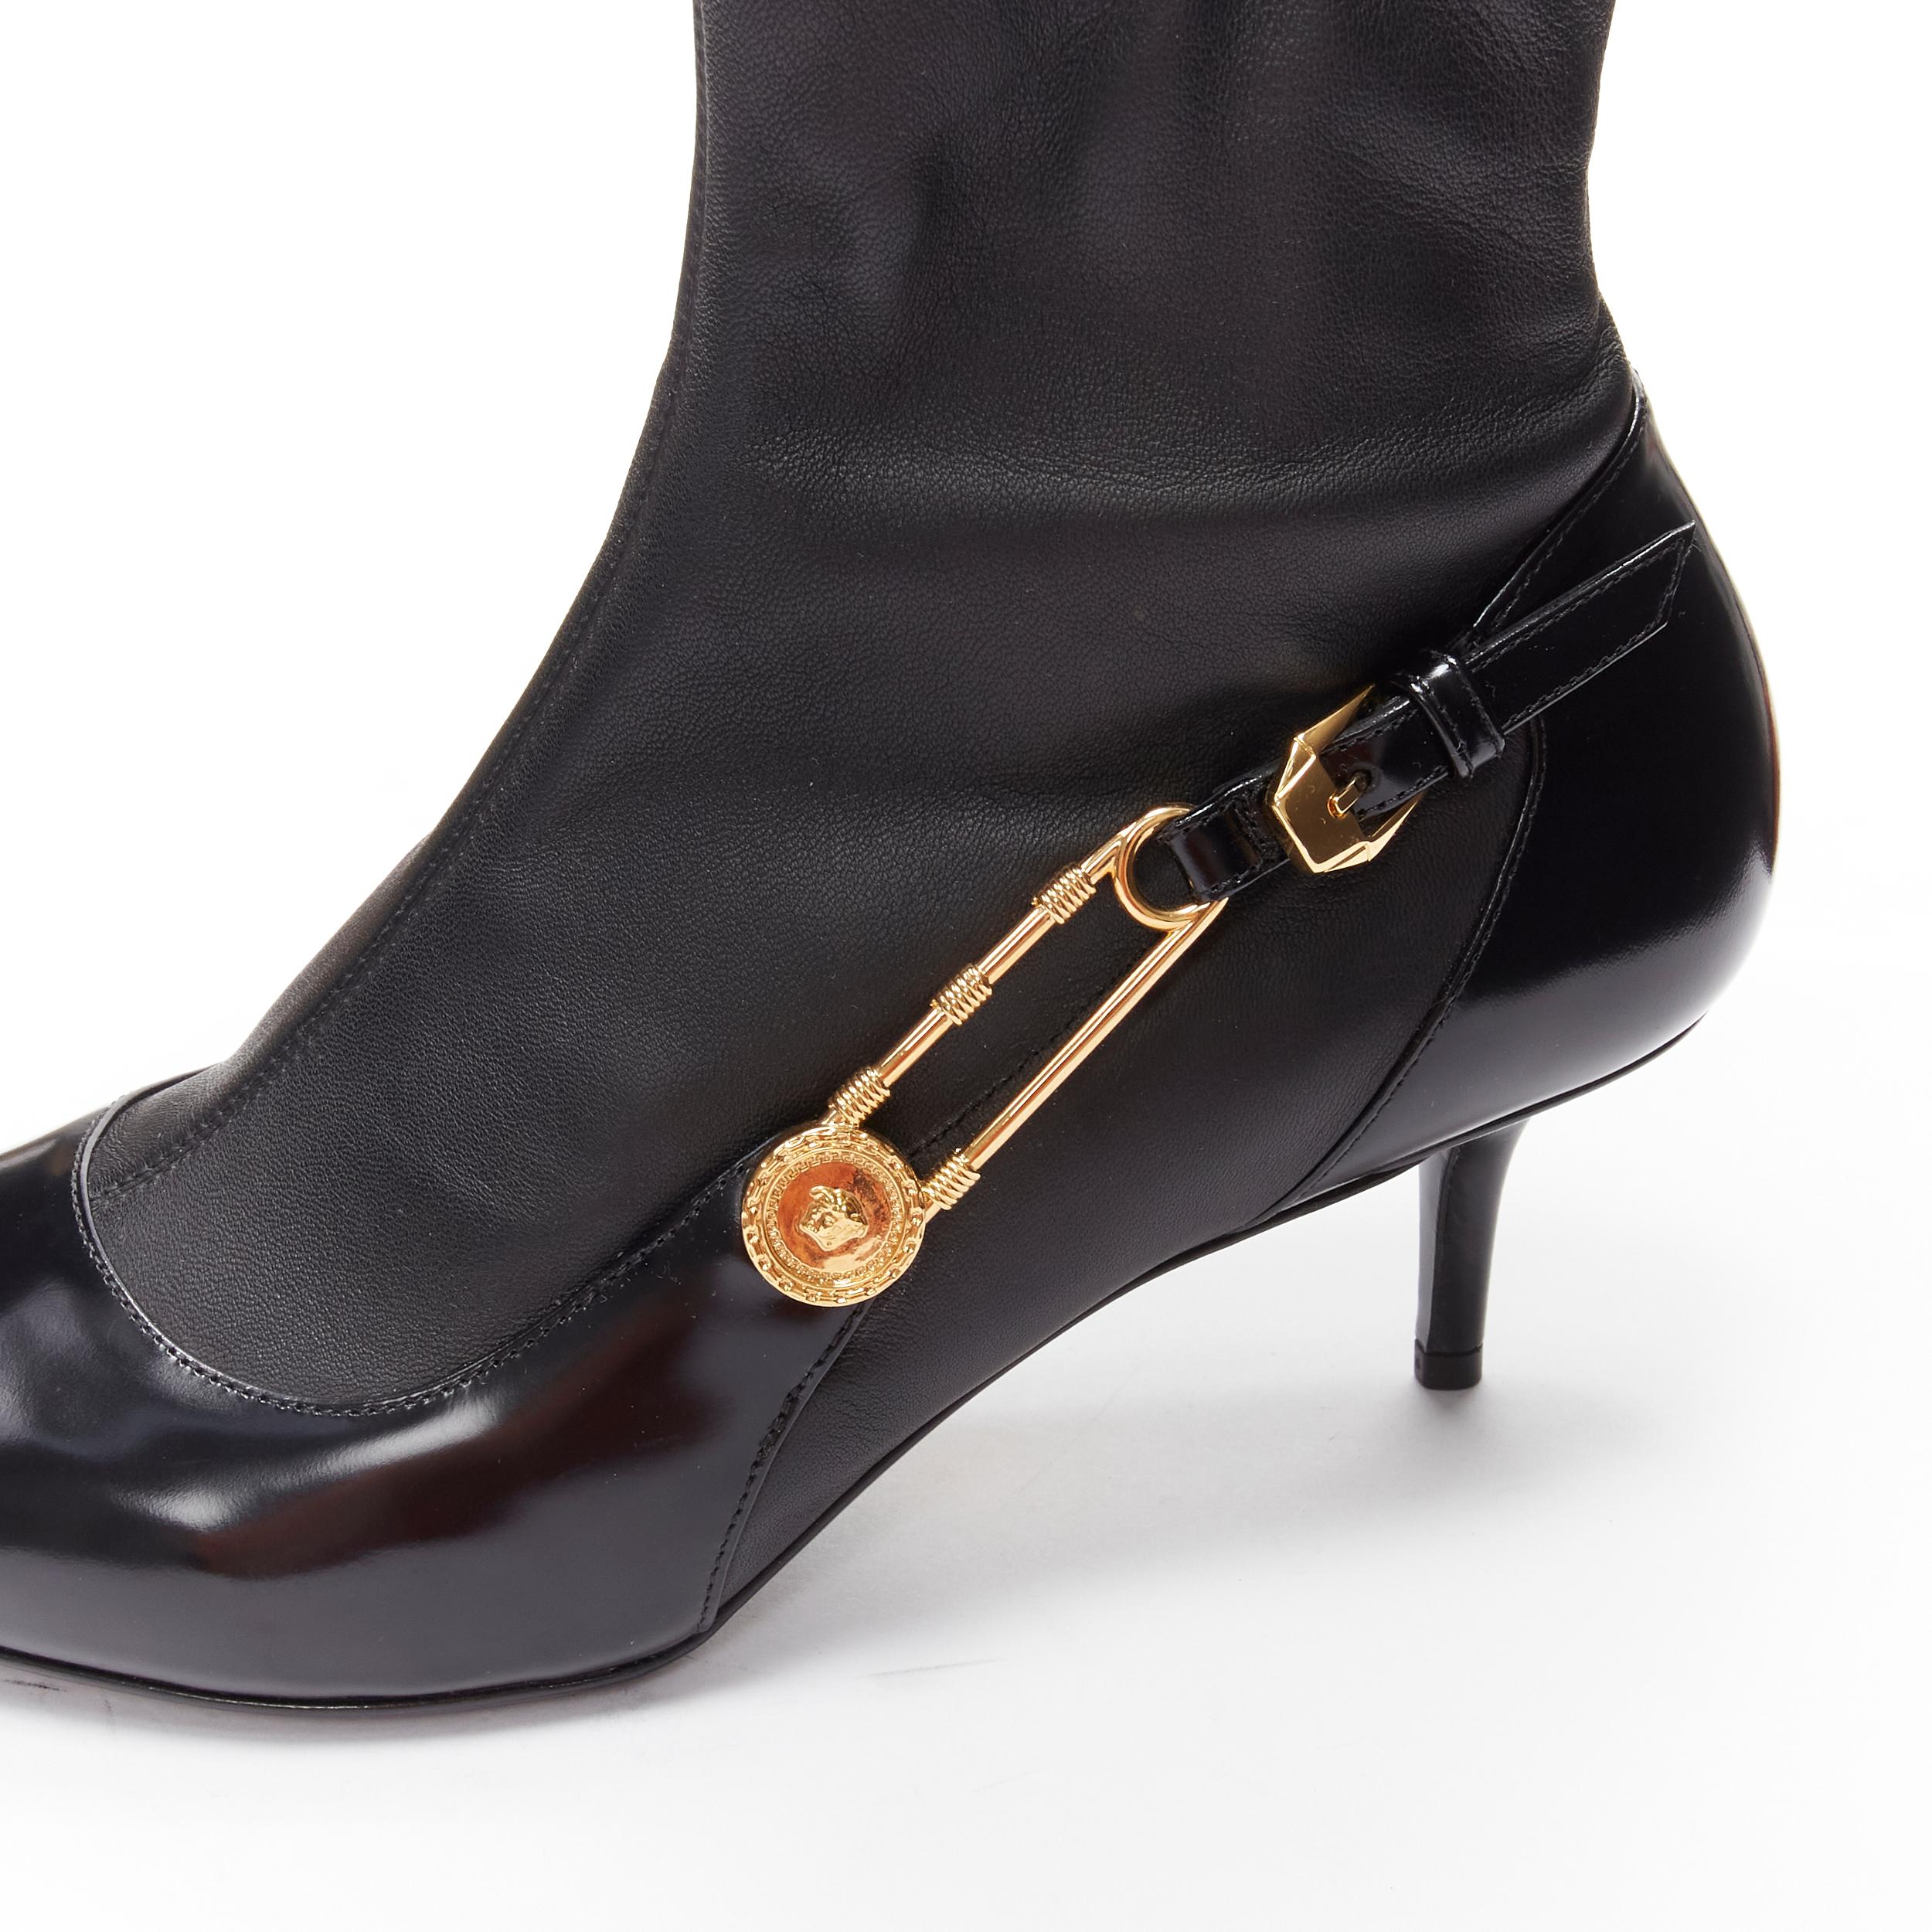 new VERSACE gold Medusa Punk Safety Pin black leather kitten heel bootie EU37

Reference: TGAS/C01777

Brand: Versace

Designer: Donatella Versace

Model: DST422H DNA28 D41OH

Material: Leather

Color: Black

Pattern: Solid

Extra Details: Soft